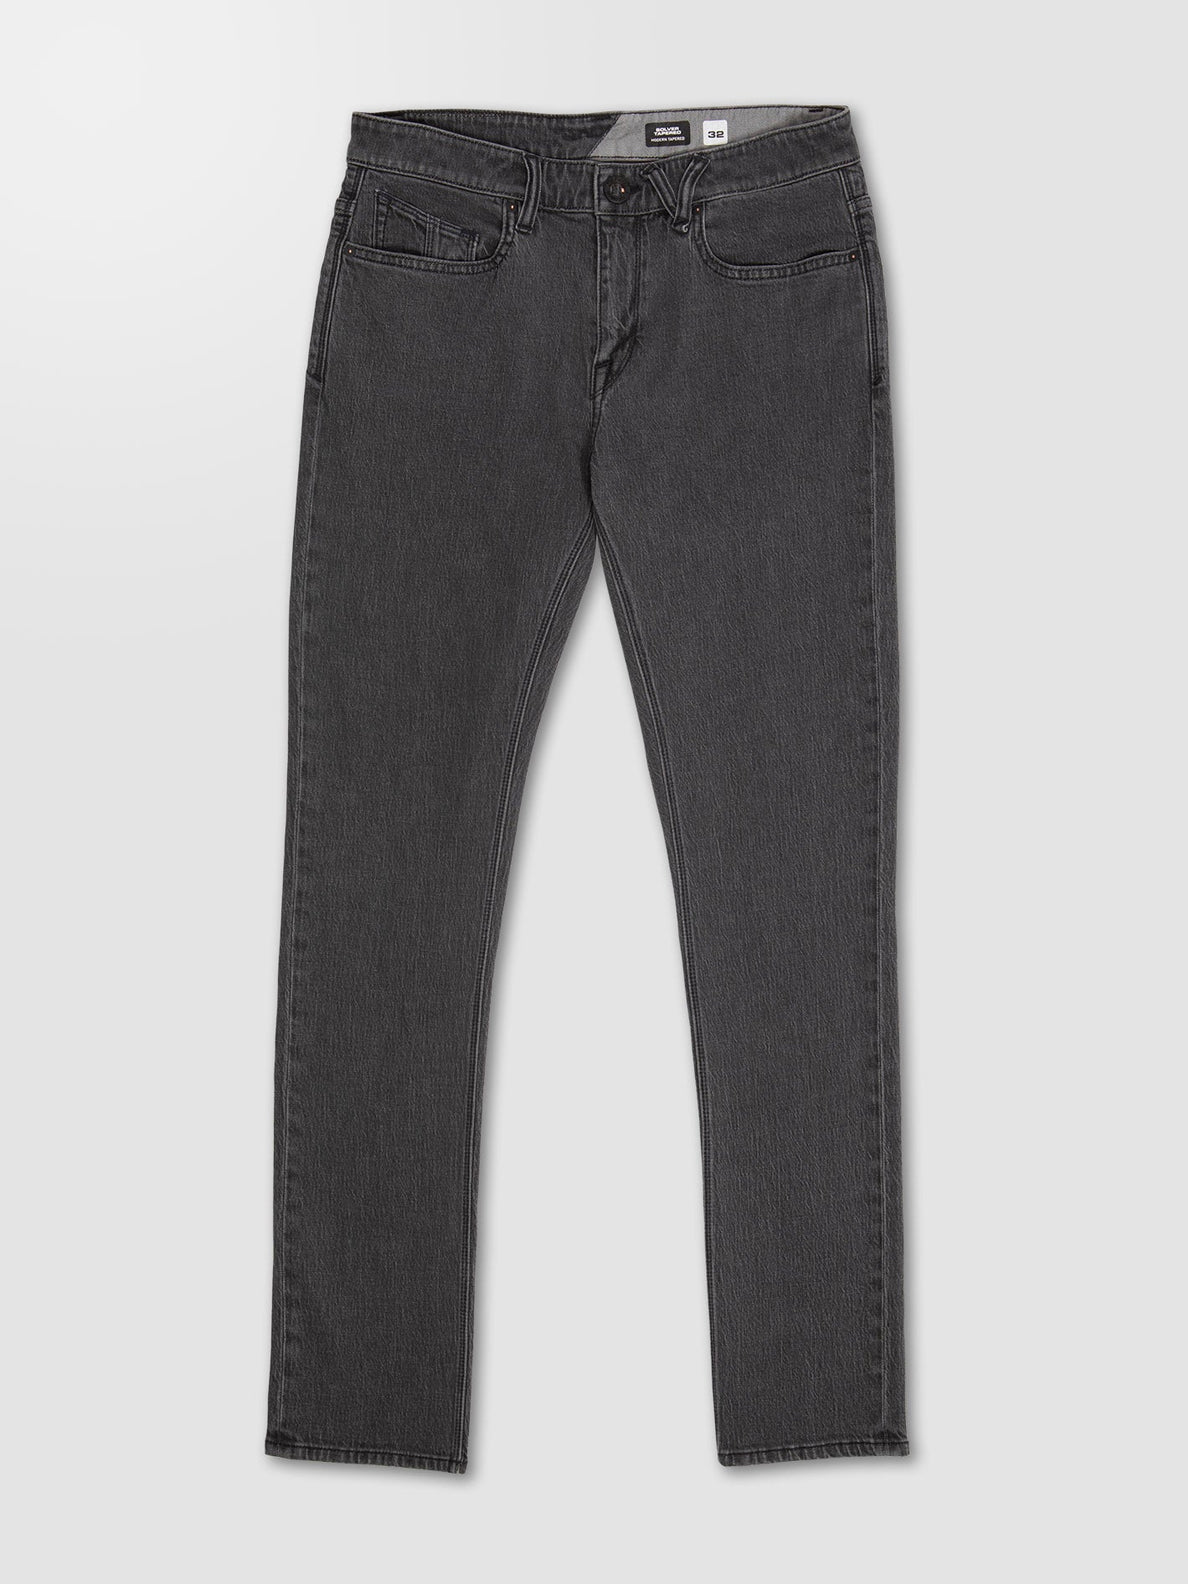 Solver Tapered Jeans - STONEY BLACK (A1932201_STY) [8]